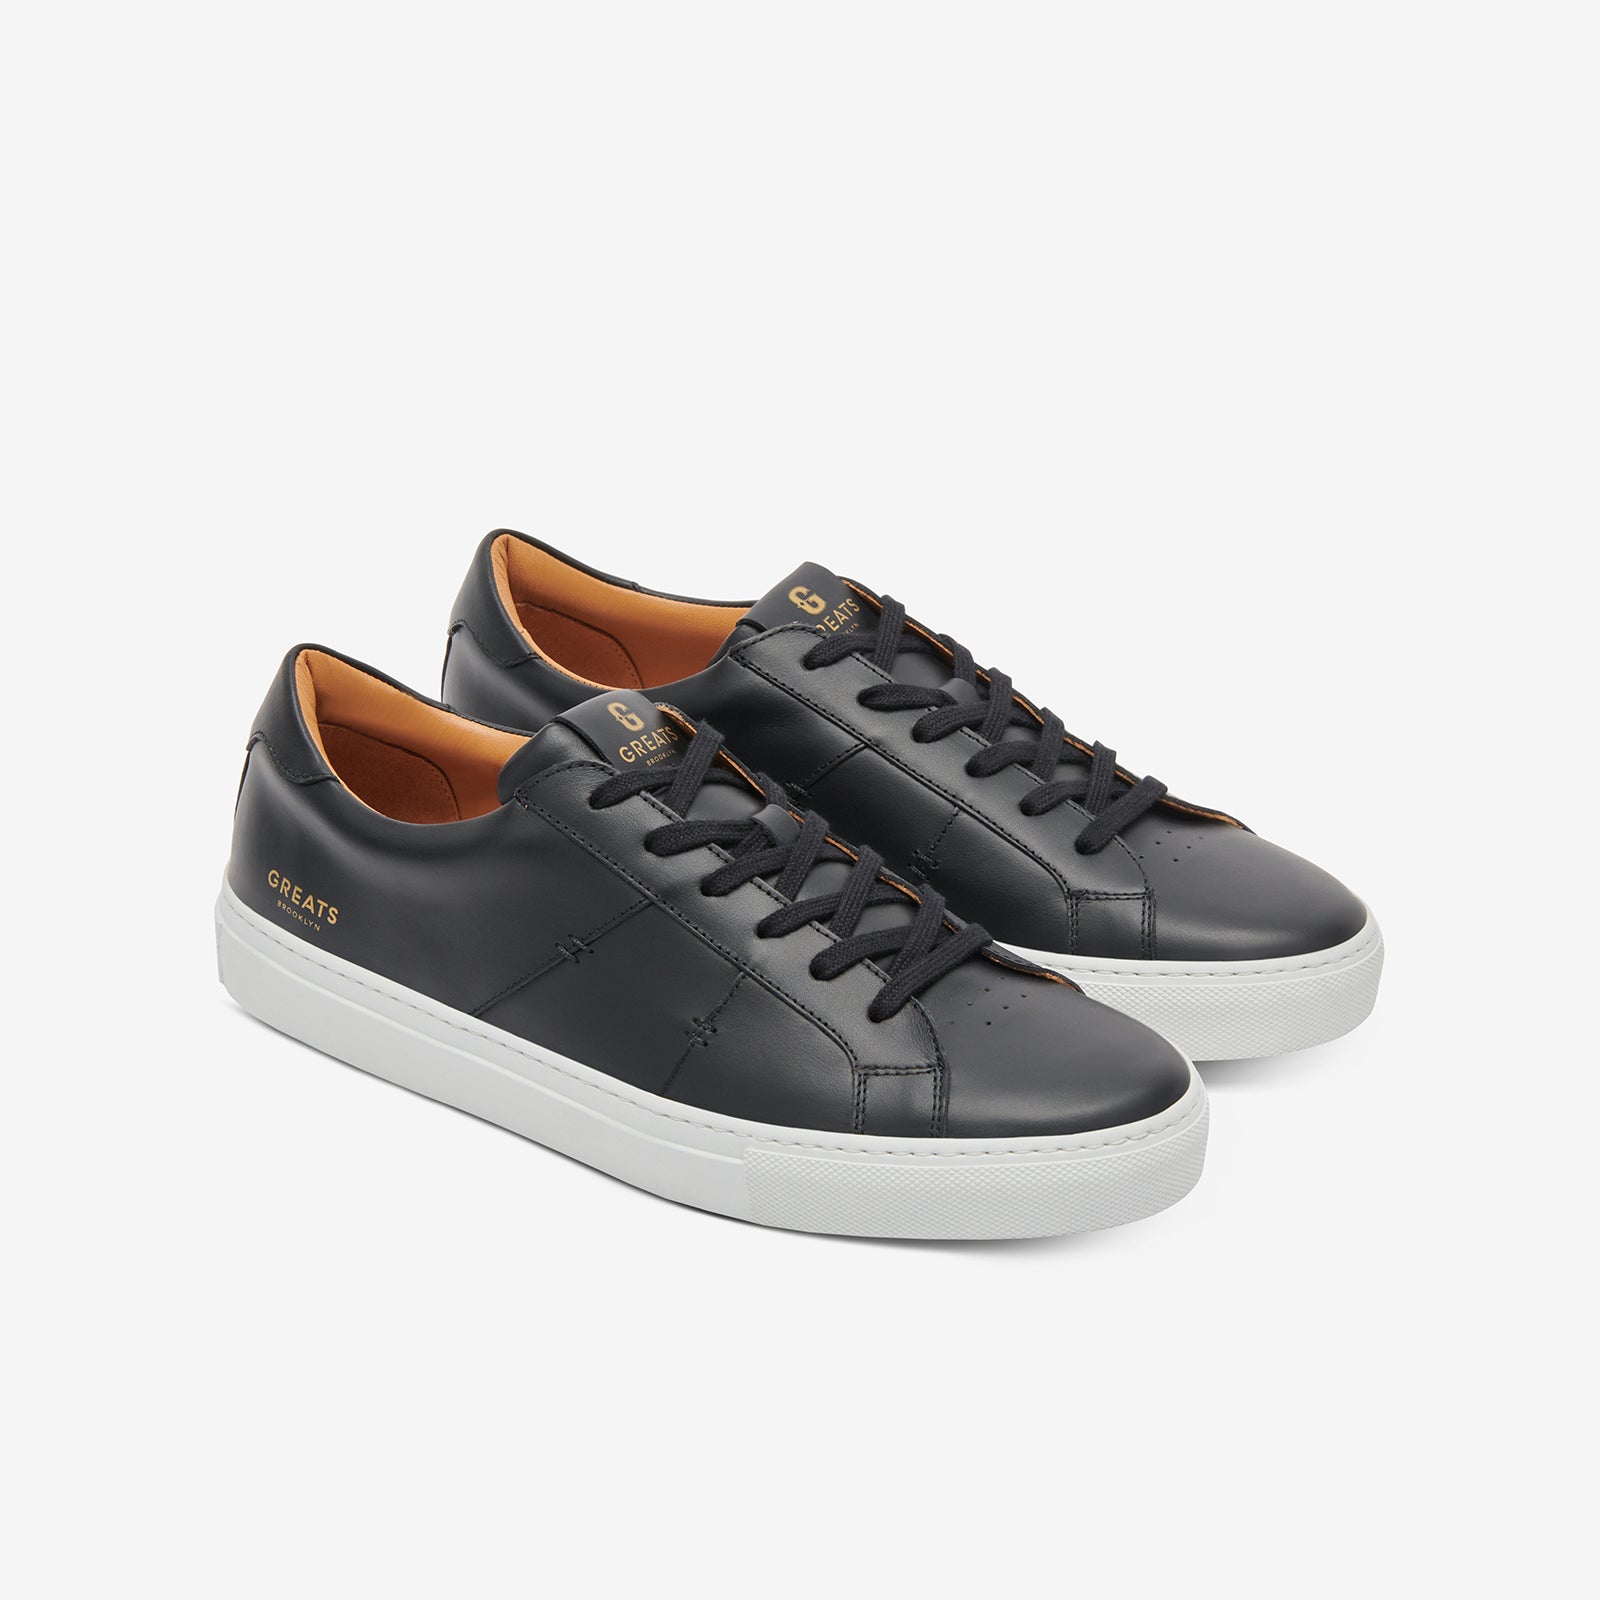 GREATS Royale Premium Sneakers wm 8-8.5 | Sneakers, Boat shoes, Shoes